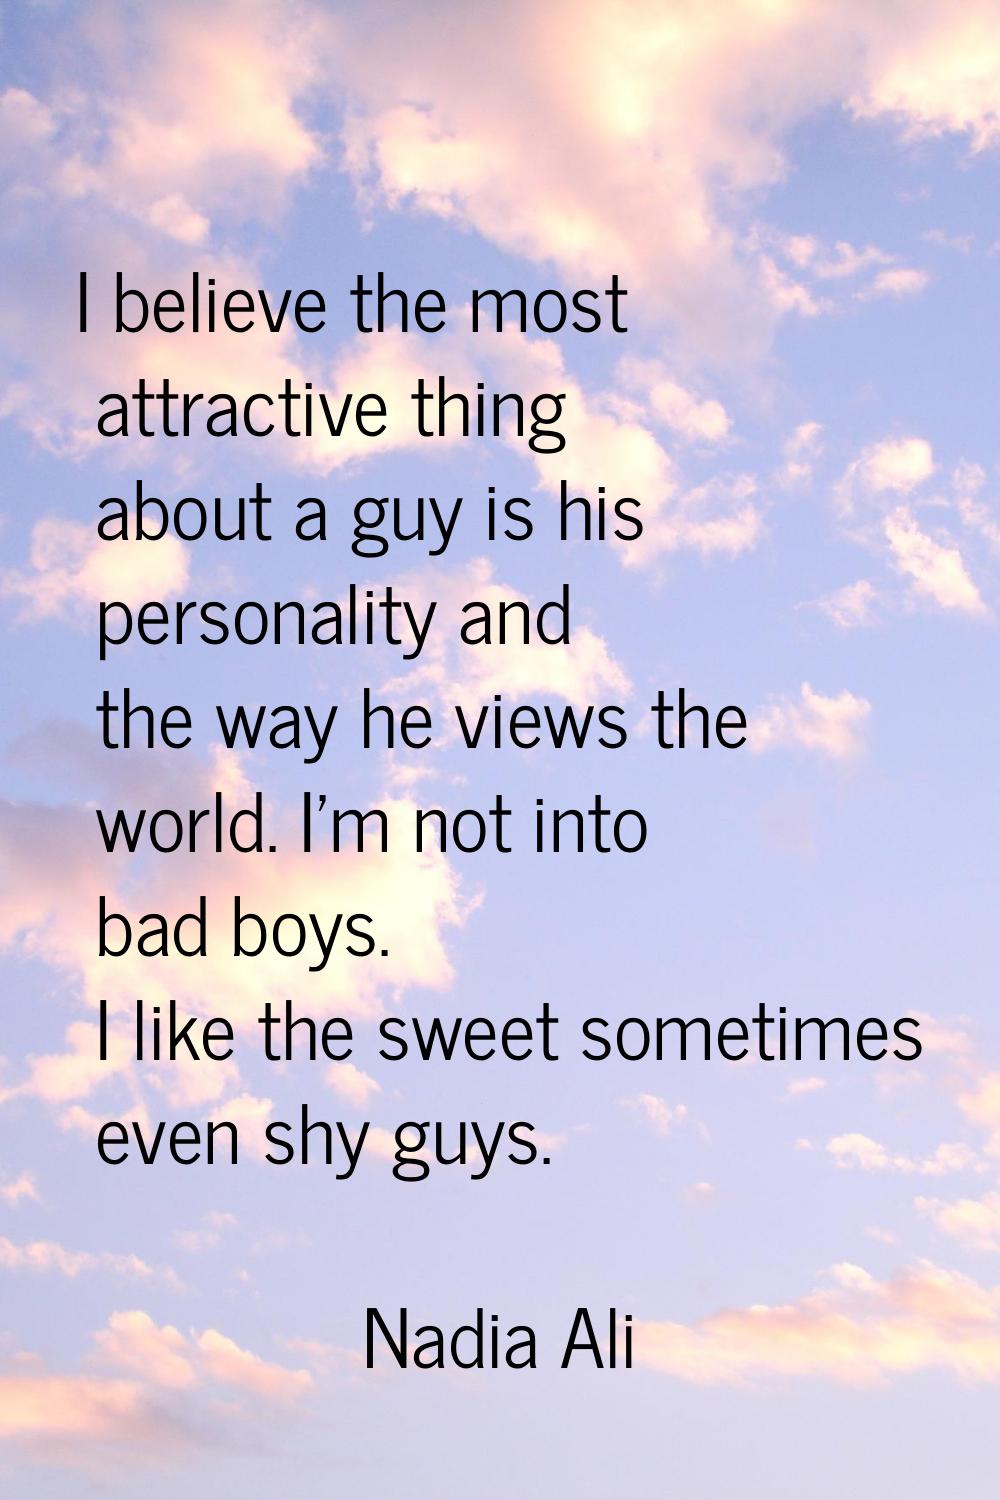 I believe the most attractive thing about a guy is his personality and the way he views the world. 